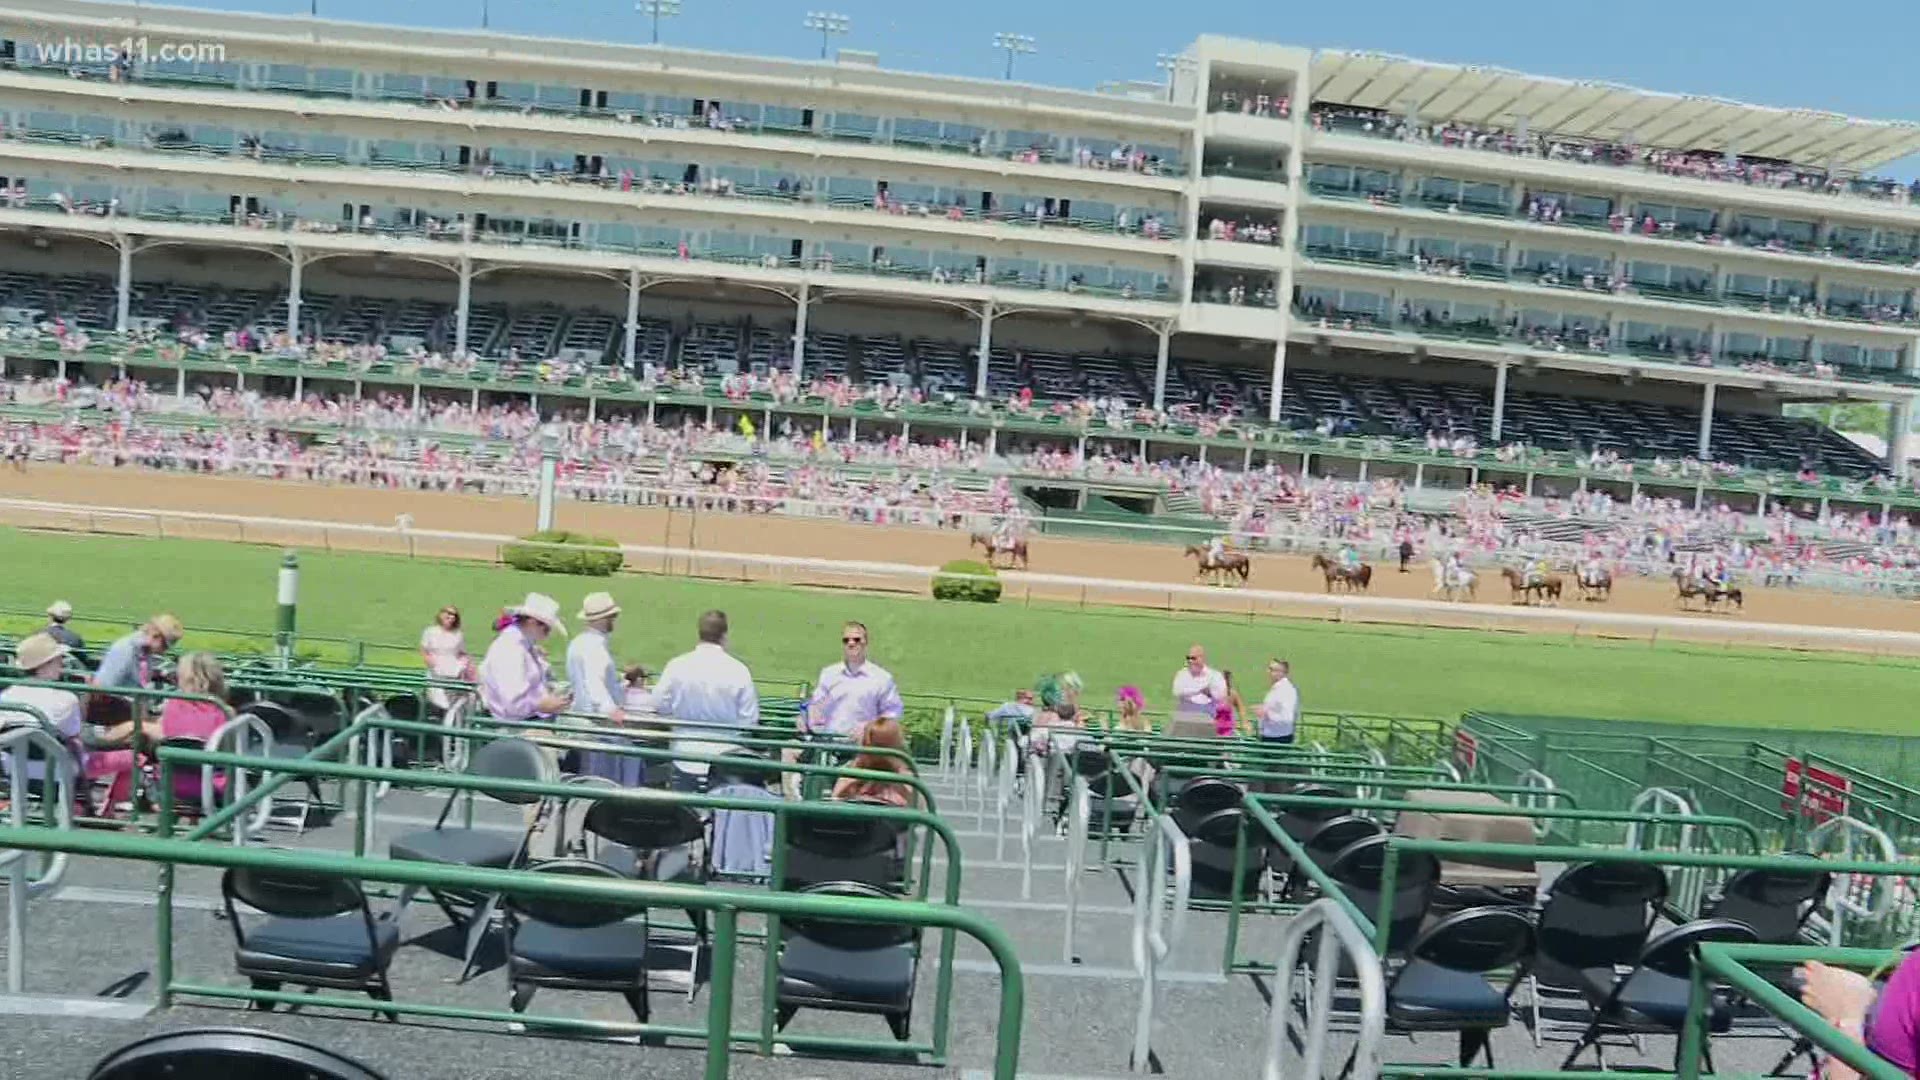 Due to the Pandemic, Kentucky Oaks saw a  smaller group of fans allowed in the Infield at Churchill Downs. Fans didn't let that completely kill the vibe.